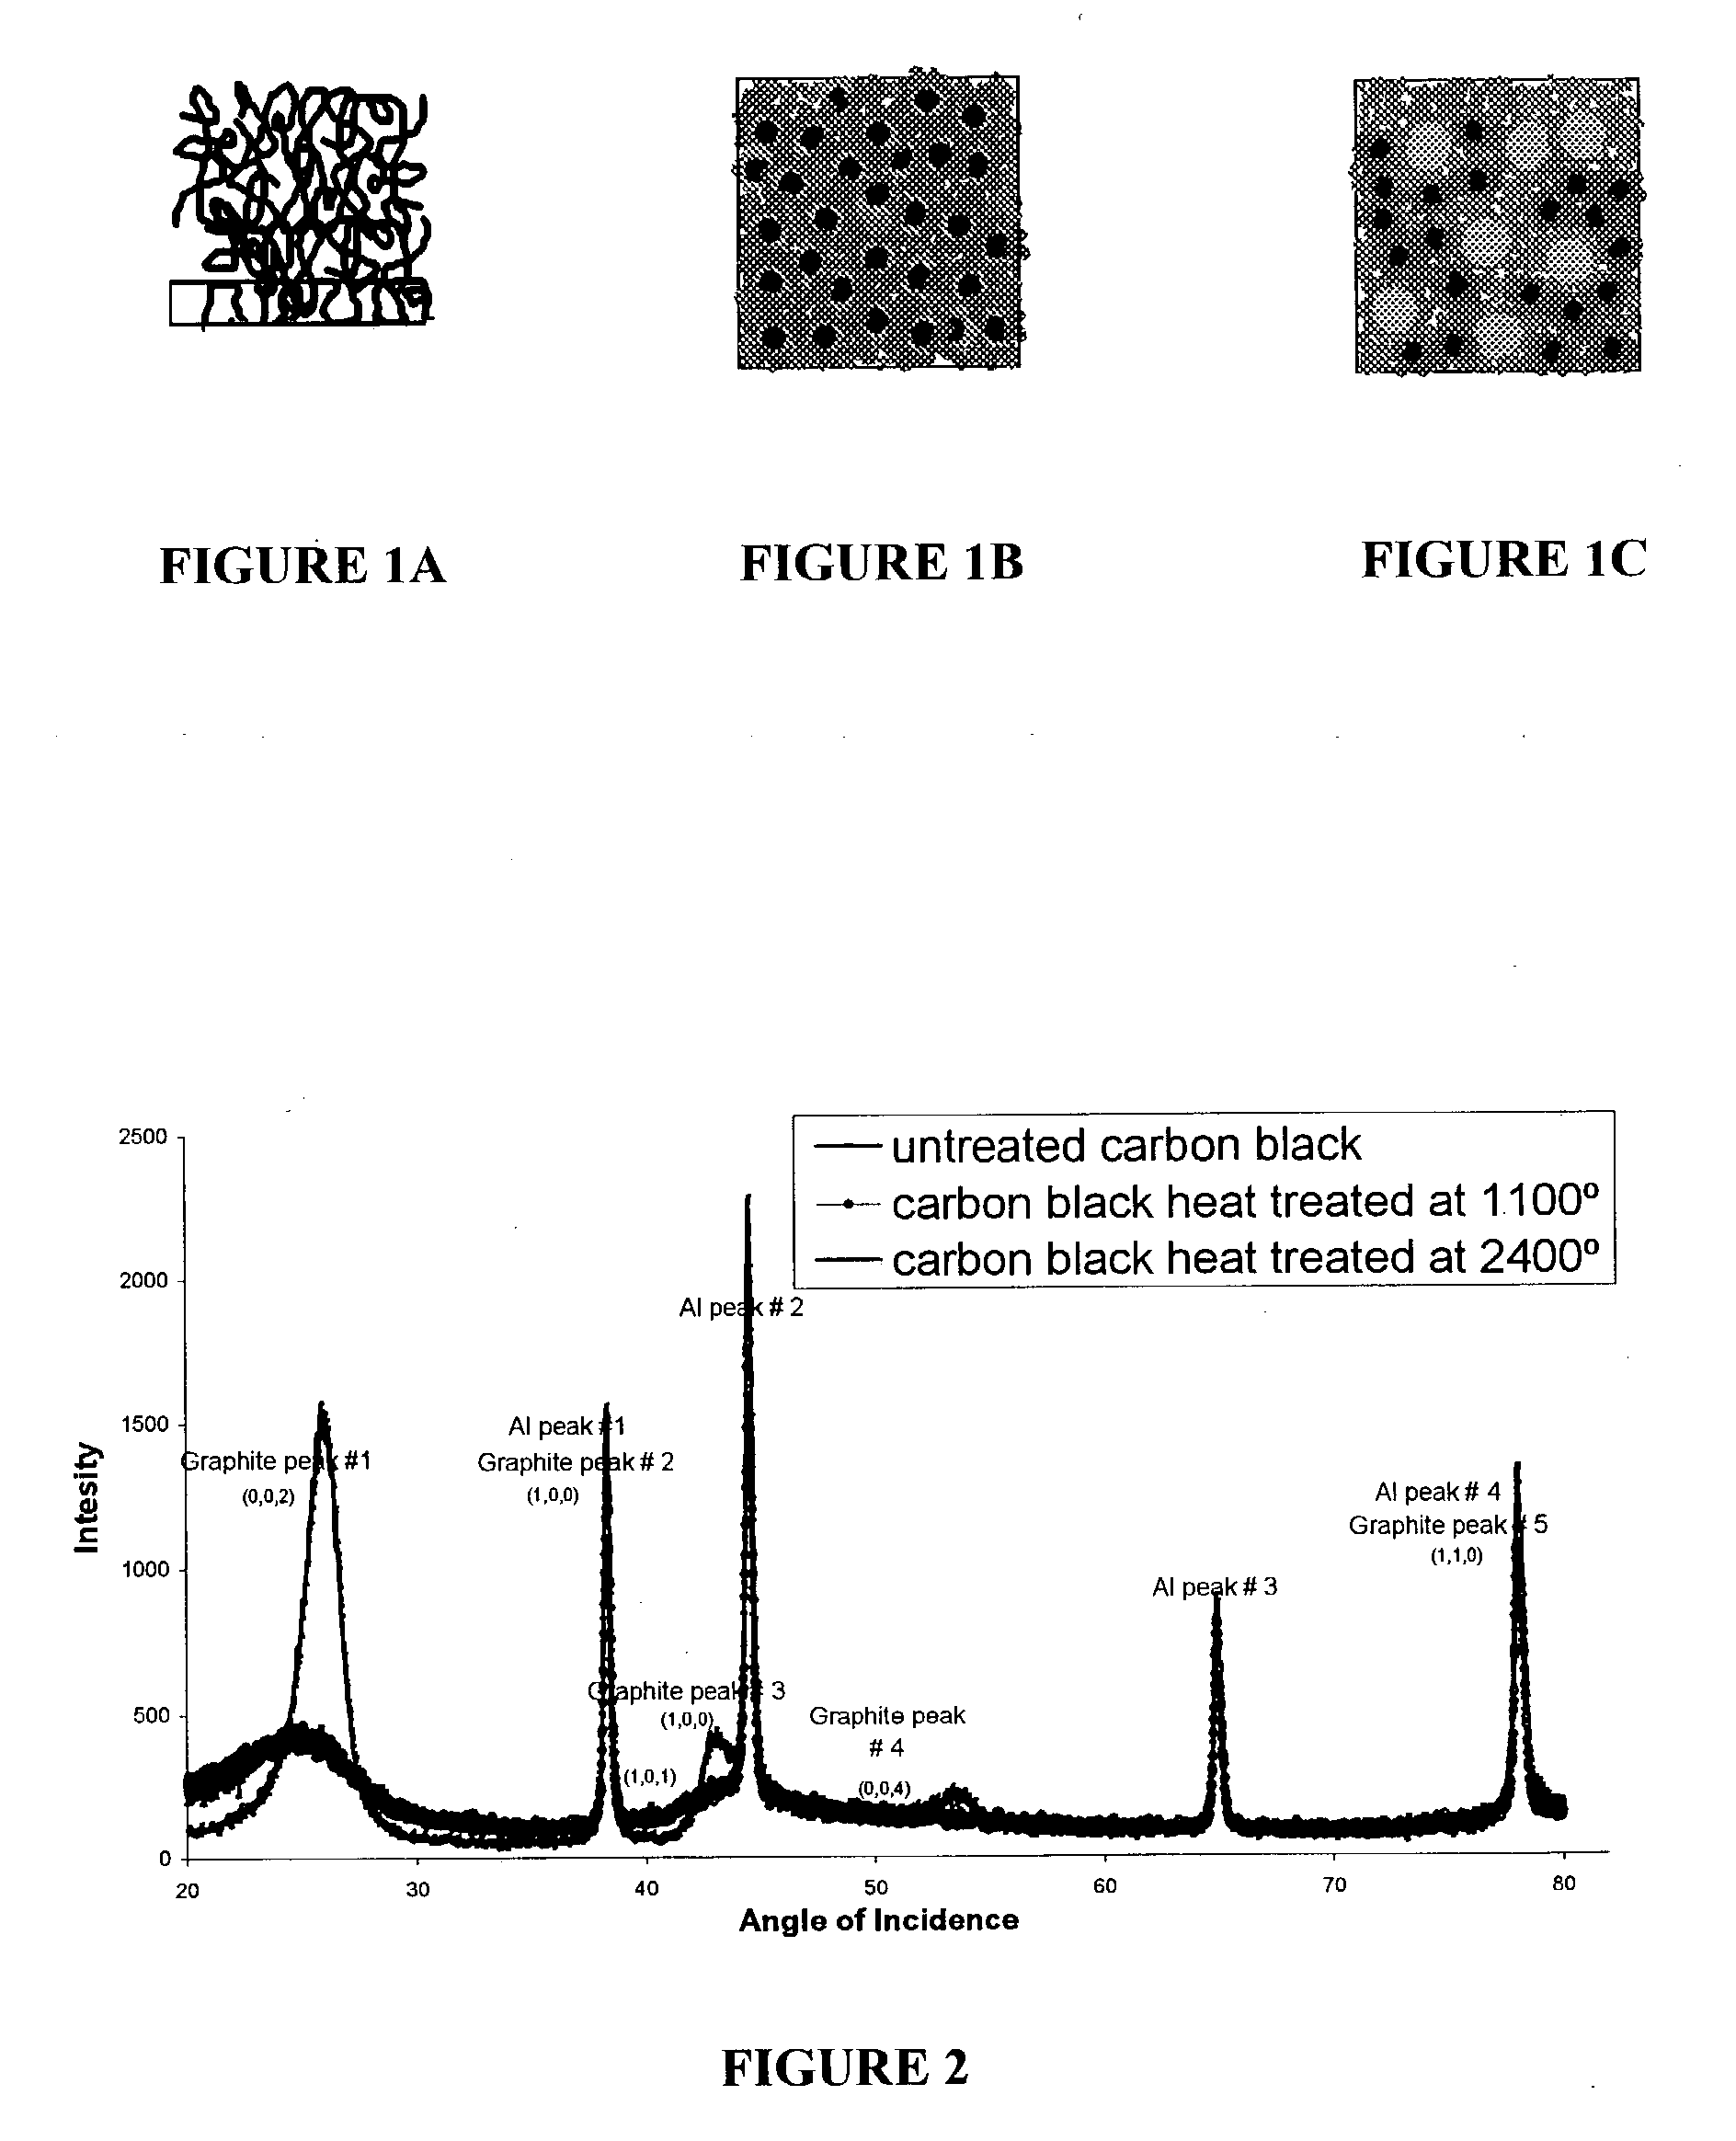 Method for enhancing polymer adhesion using filler particle mix and compositions made using the method